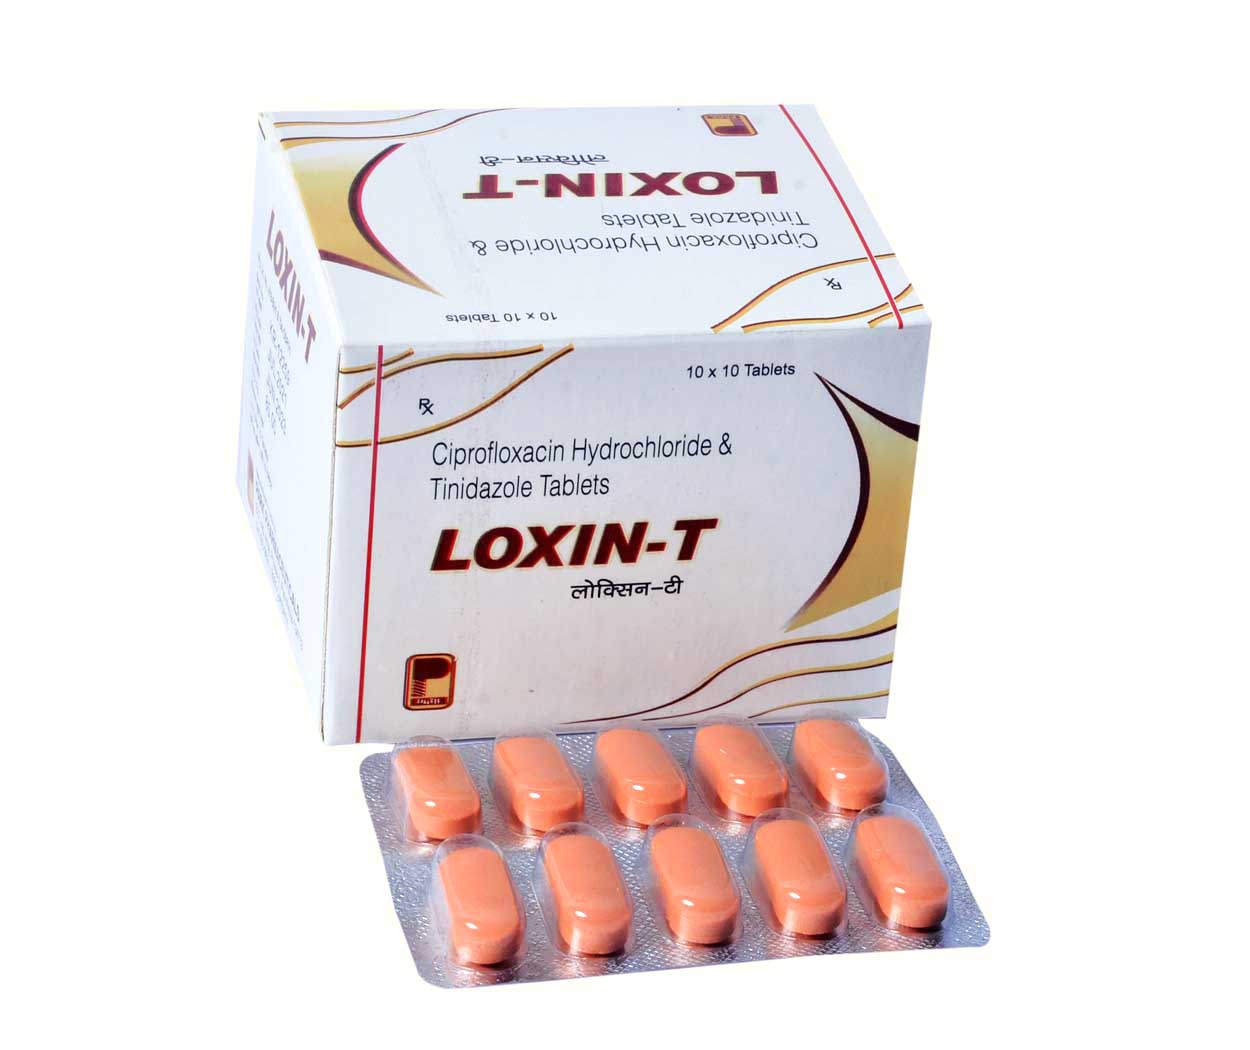 Product Name: Loxin T, Compositions of Loxin T are Ciprofloxacin Hydrochloride & Tinidazole Tablets - Park Pharmaceuticals